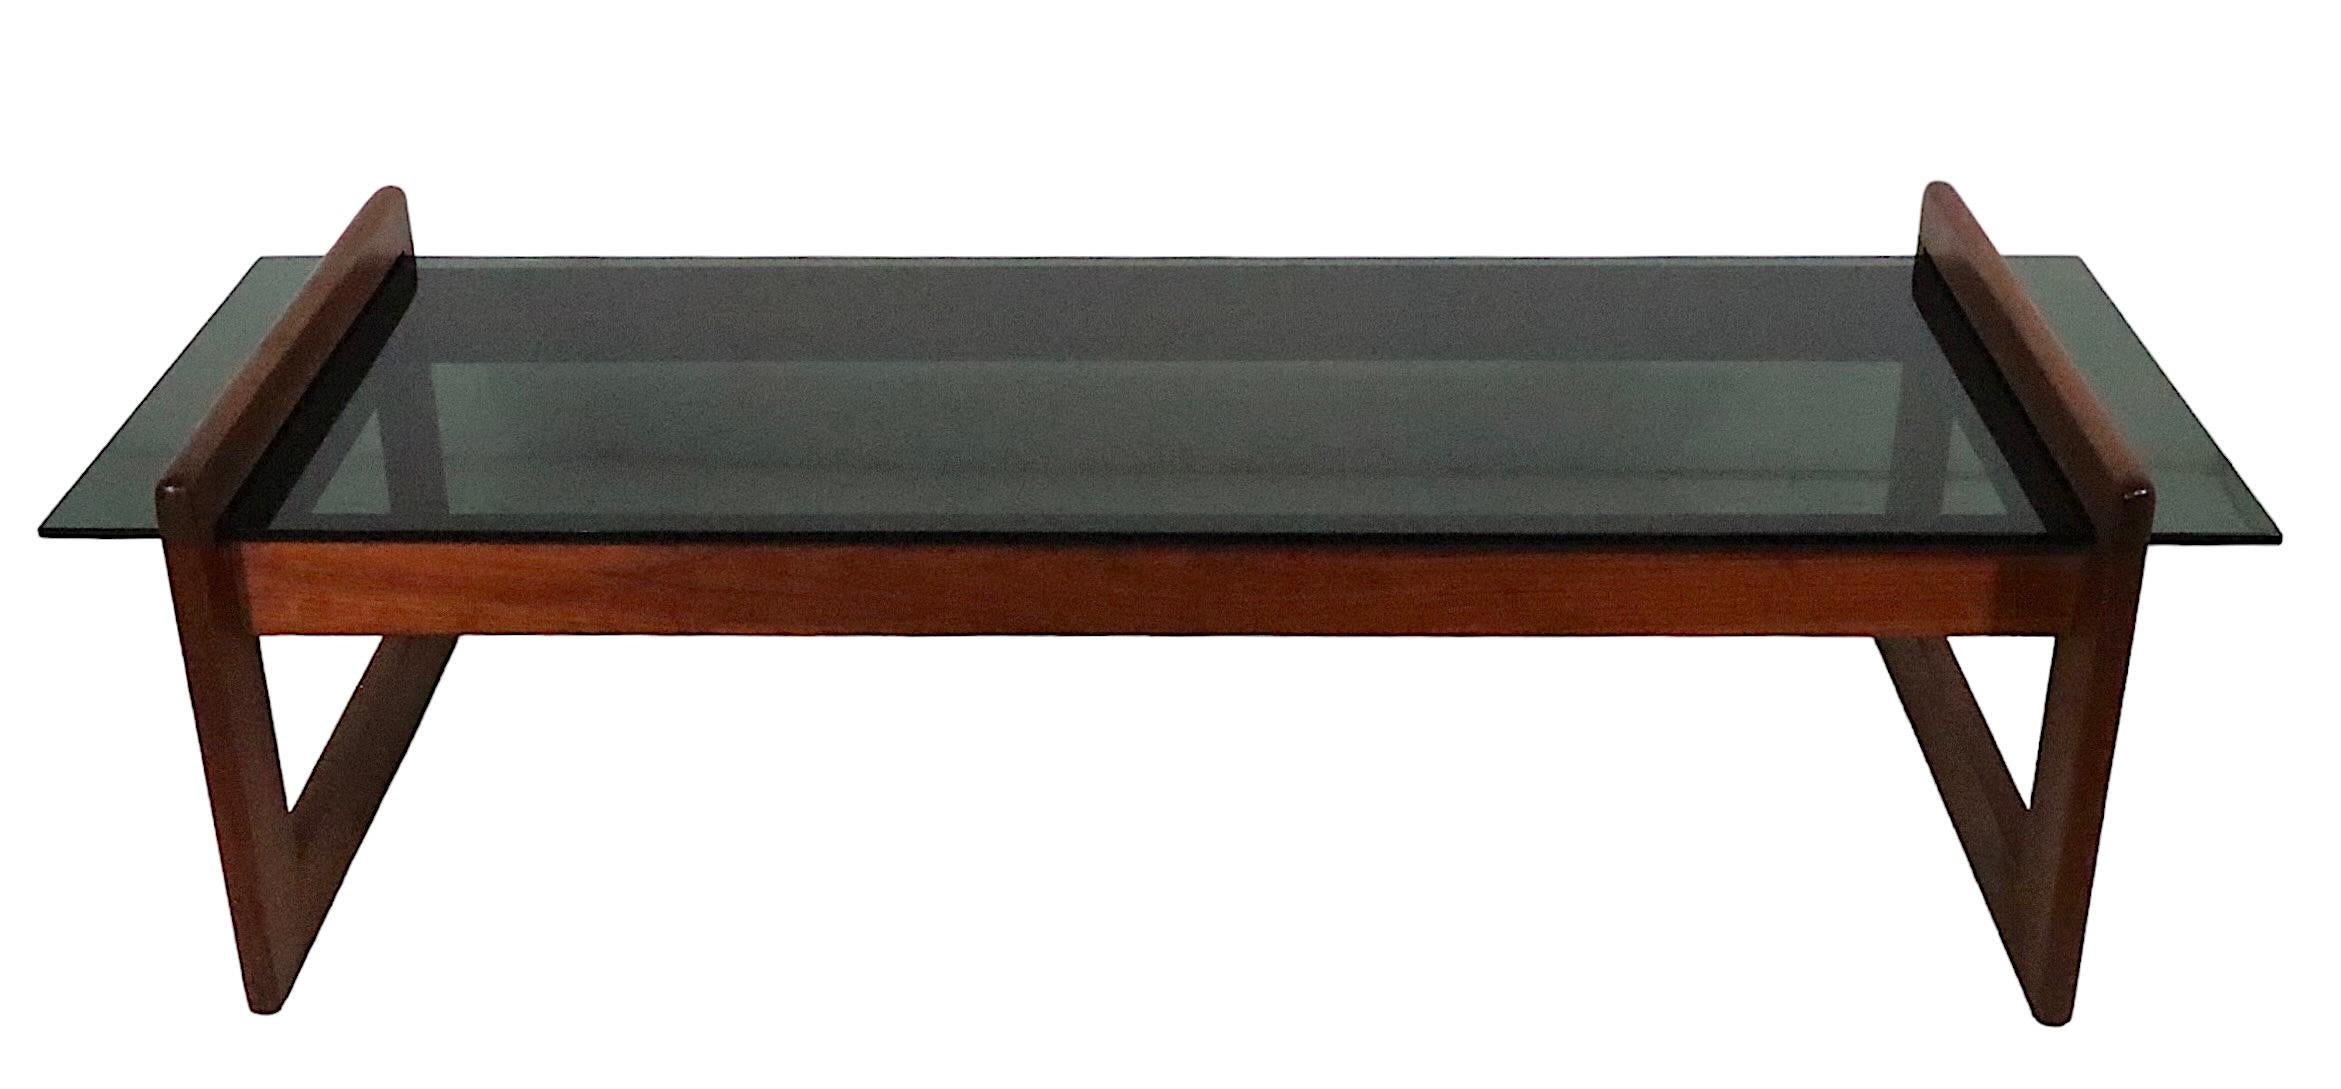 Exceptional Mid Century coffee table designed by Adrian Pearsall circa 1970's. The table features a thick tinted glass top, which slips into the architectural  walnut frame. This example is in excellent original condition, clean and ready to use,